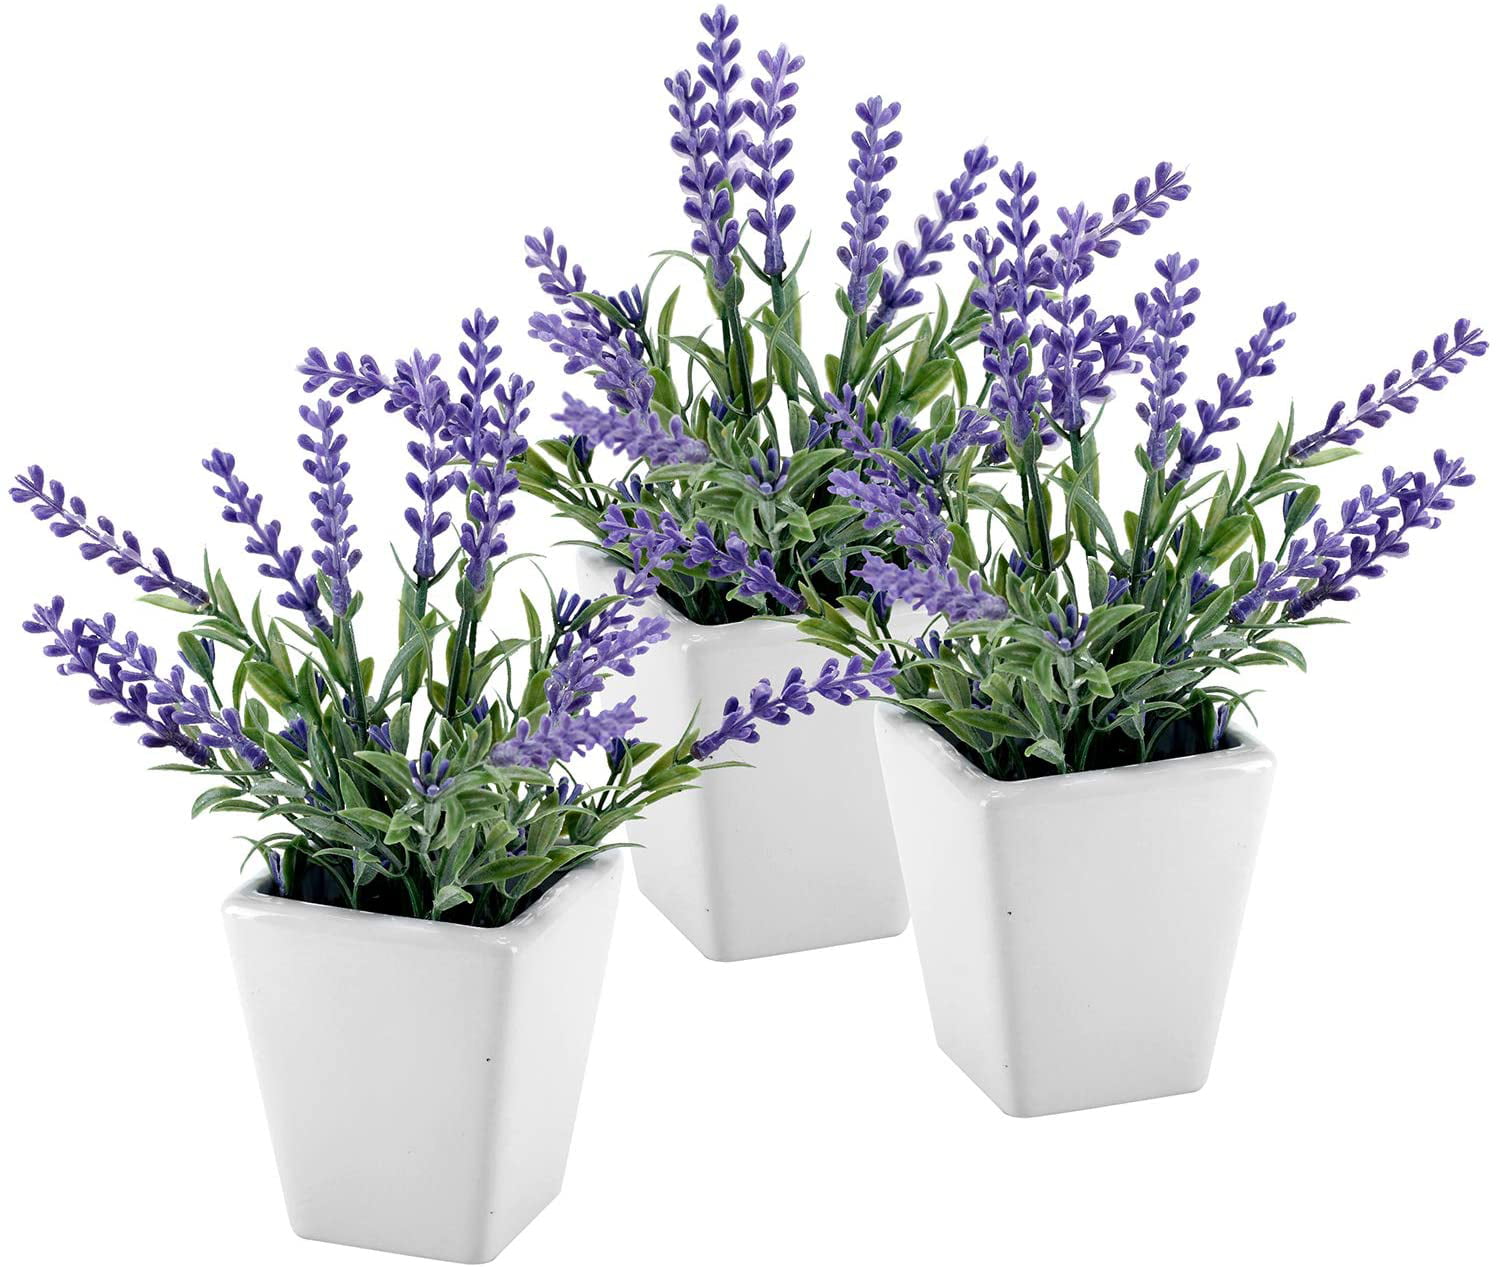 MyGift 7.5 Inch Tall Artificial Lavender Plant with Ceramic Pot Faux Flower Decor Set of 3 